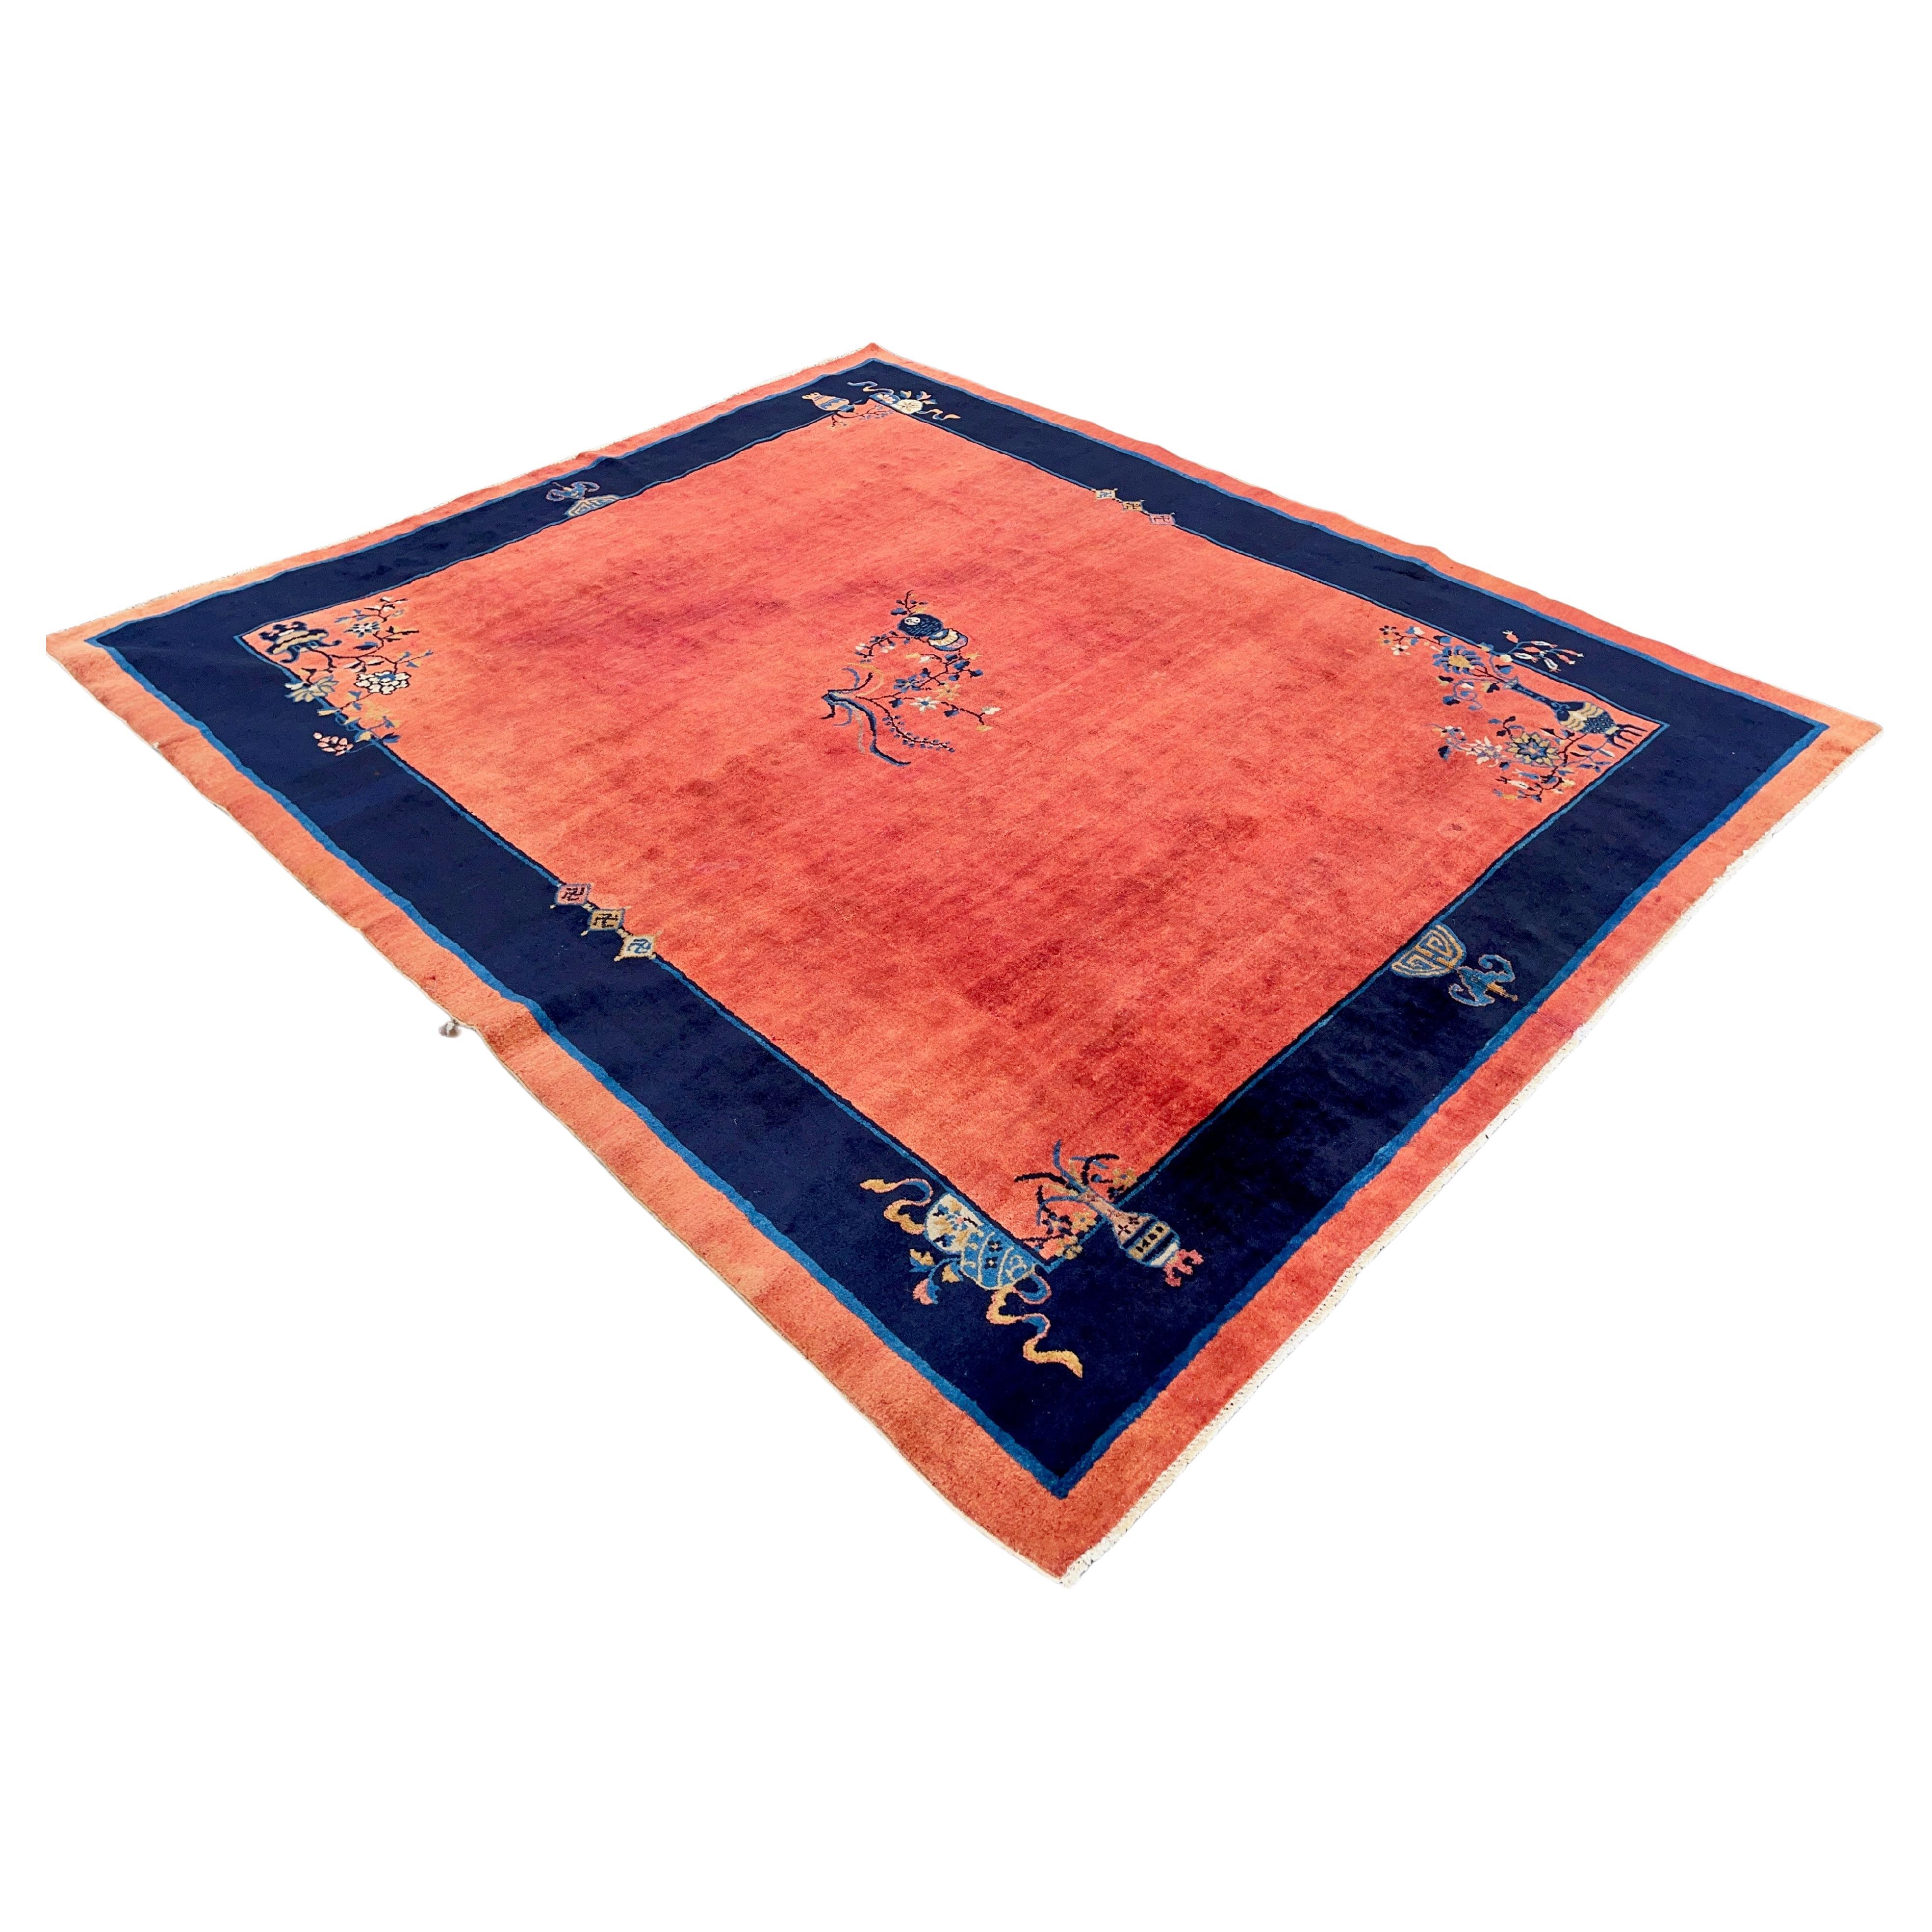 1920's Chinese Art Deco Rug - 8' x 9'9" Red & Blue For Sale